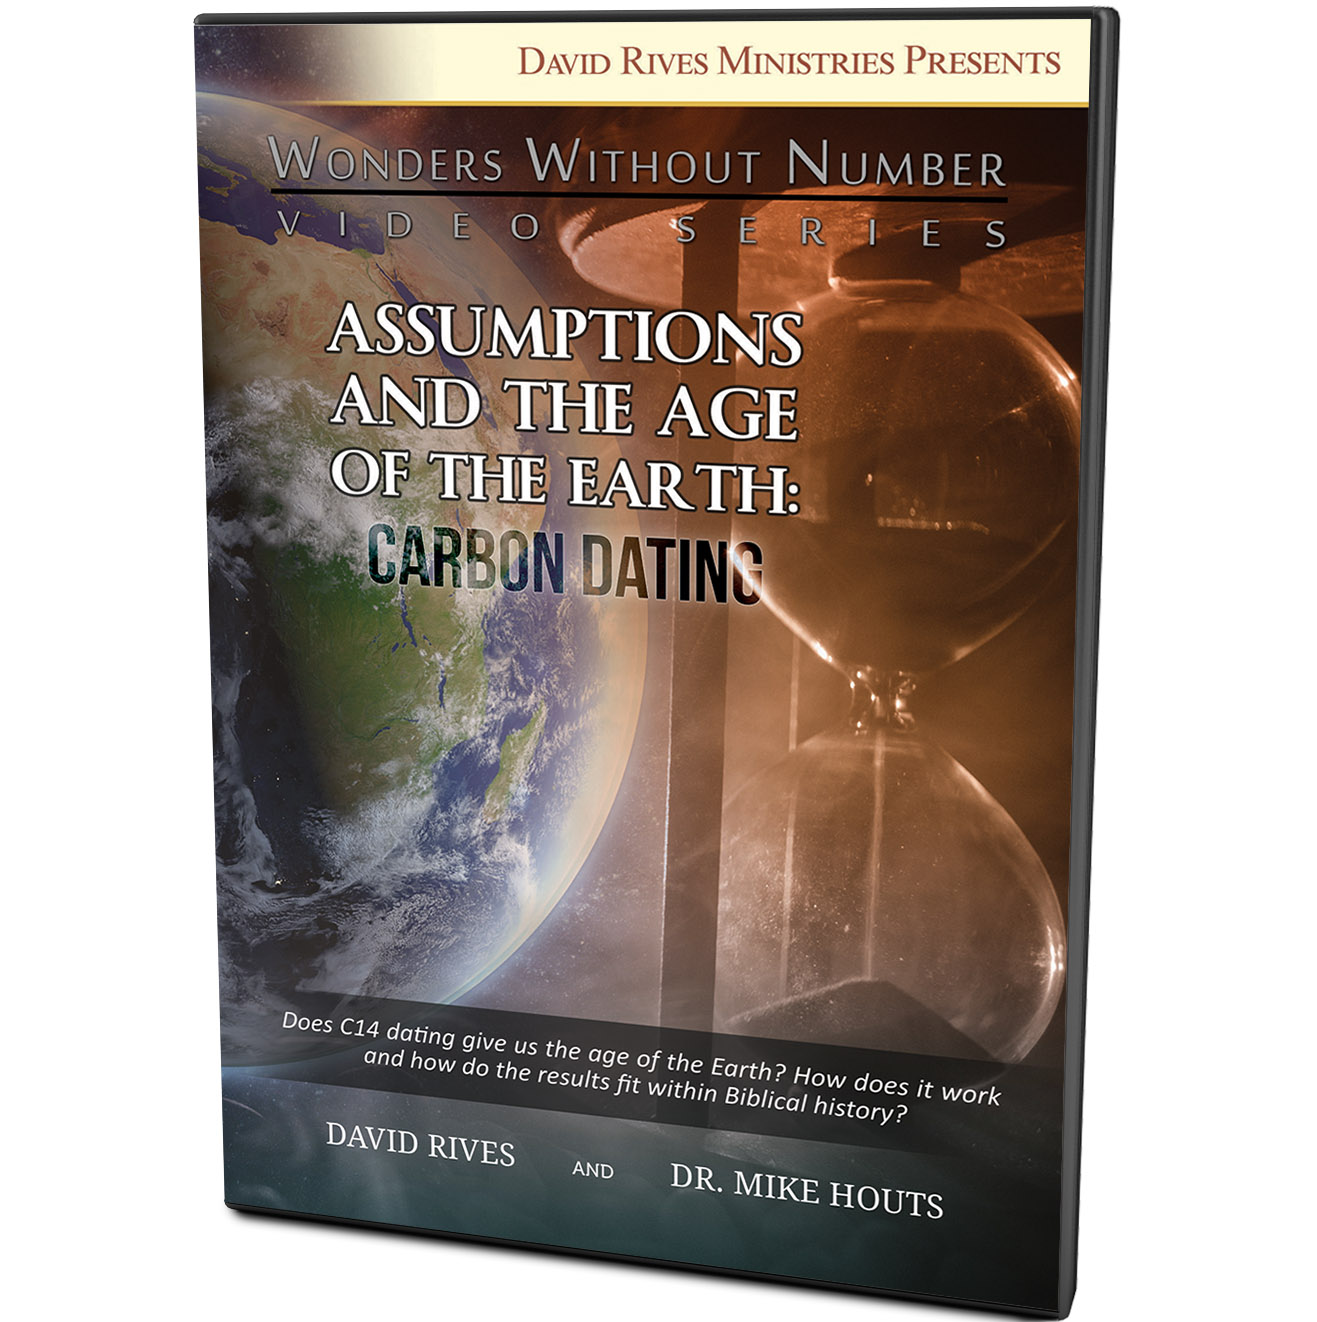 Assumptions and the Age of the Earth